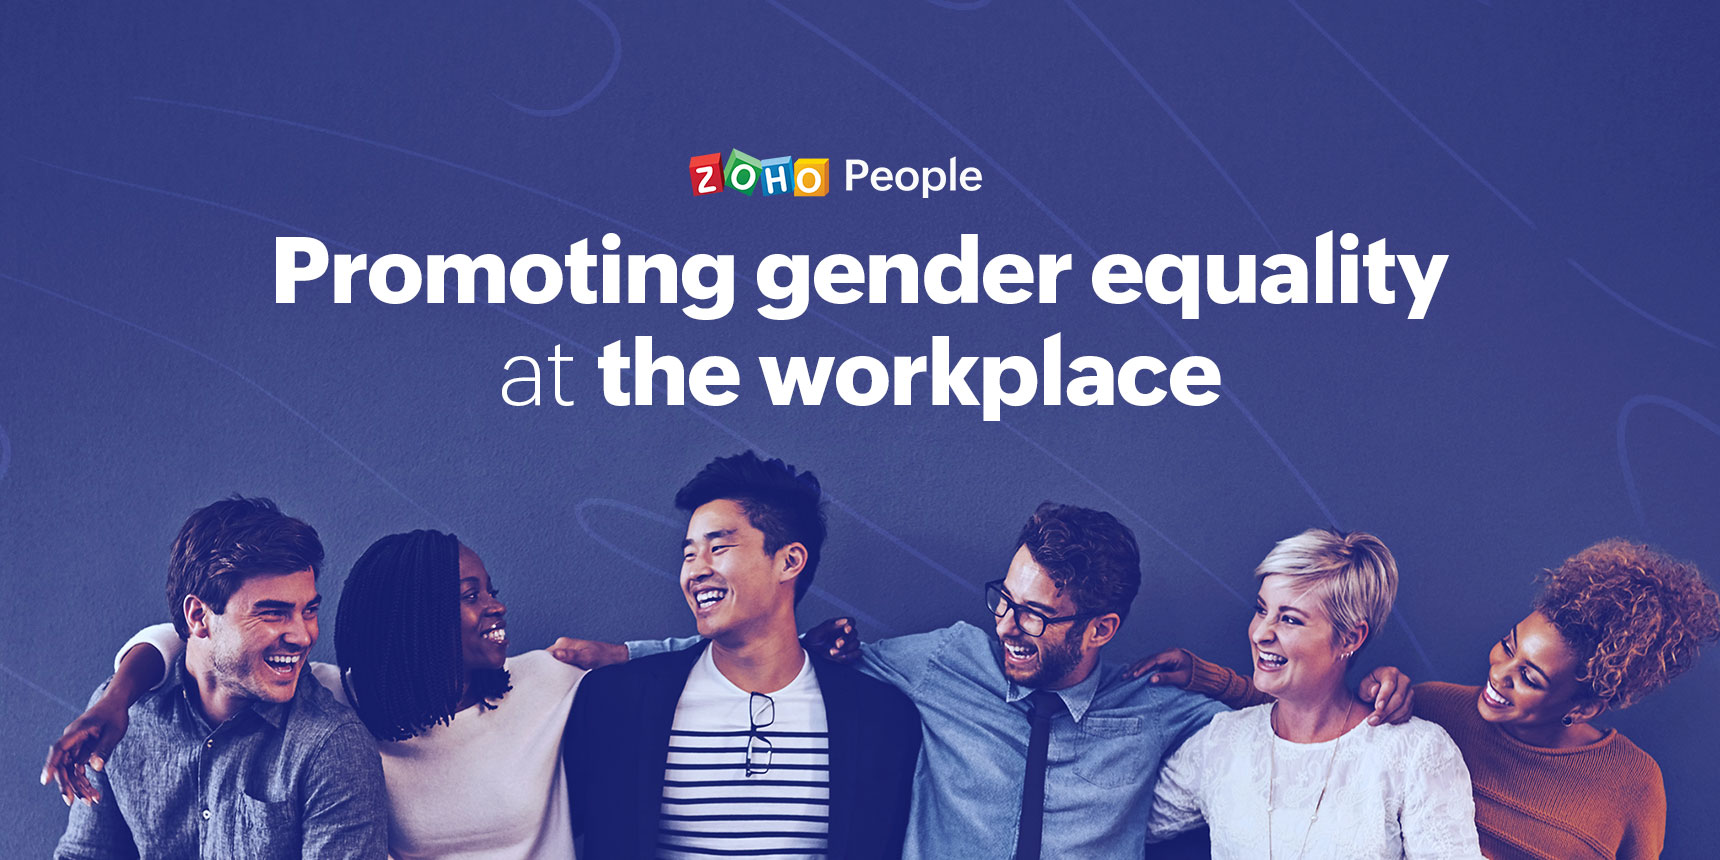 How to promote gender equality in your organization